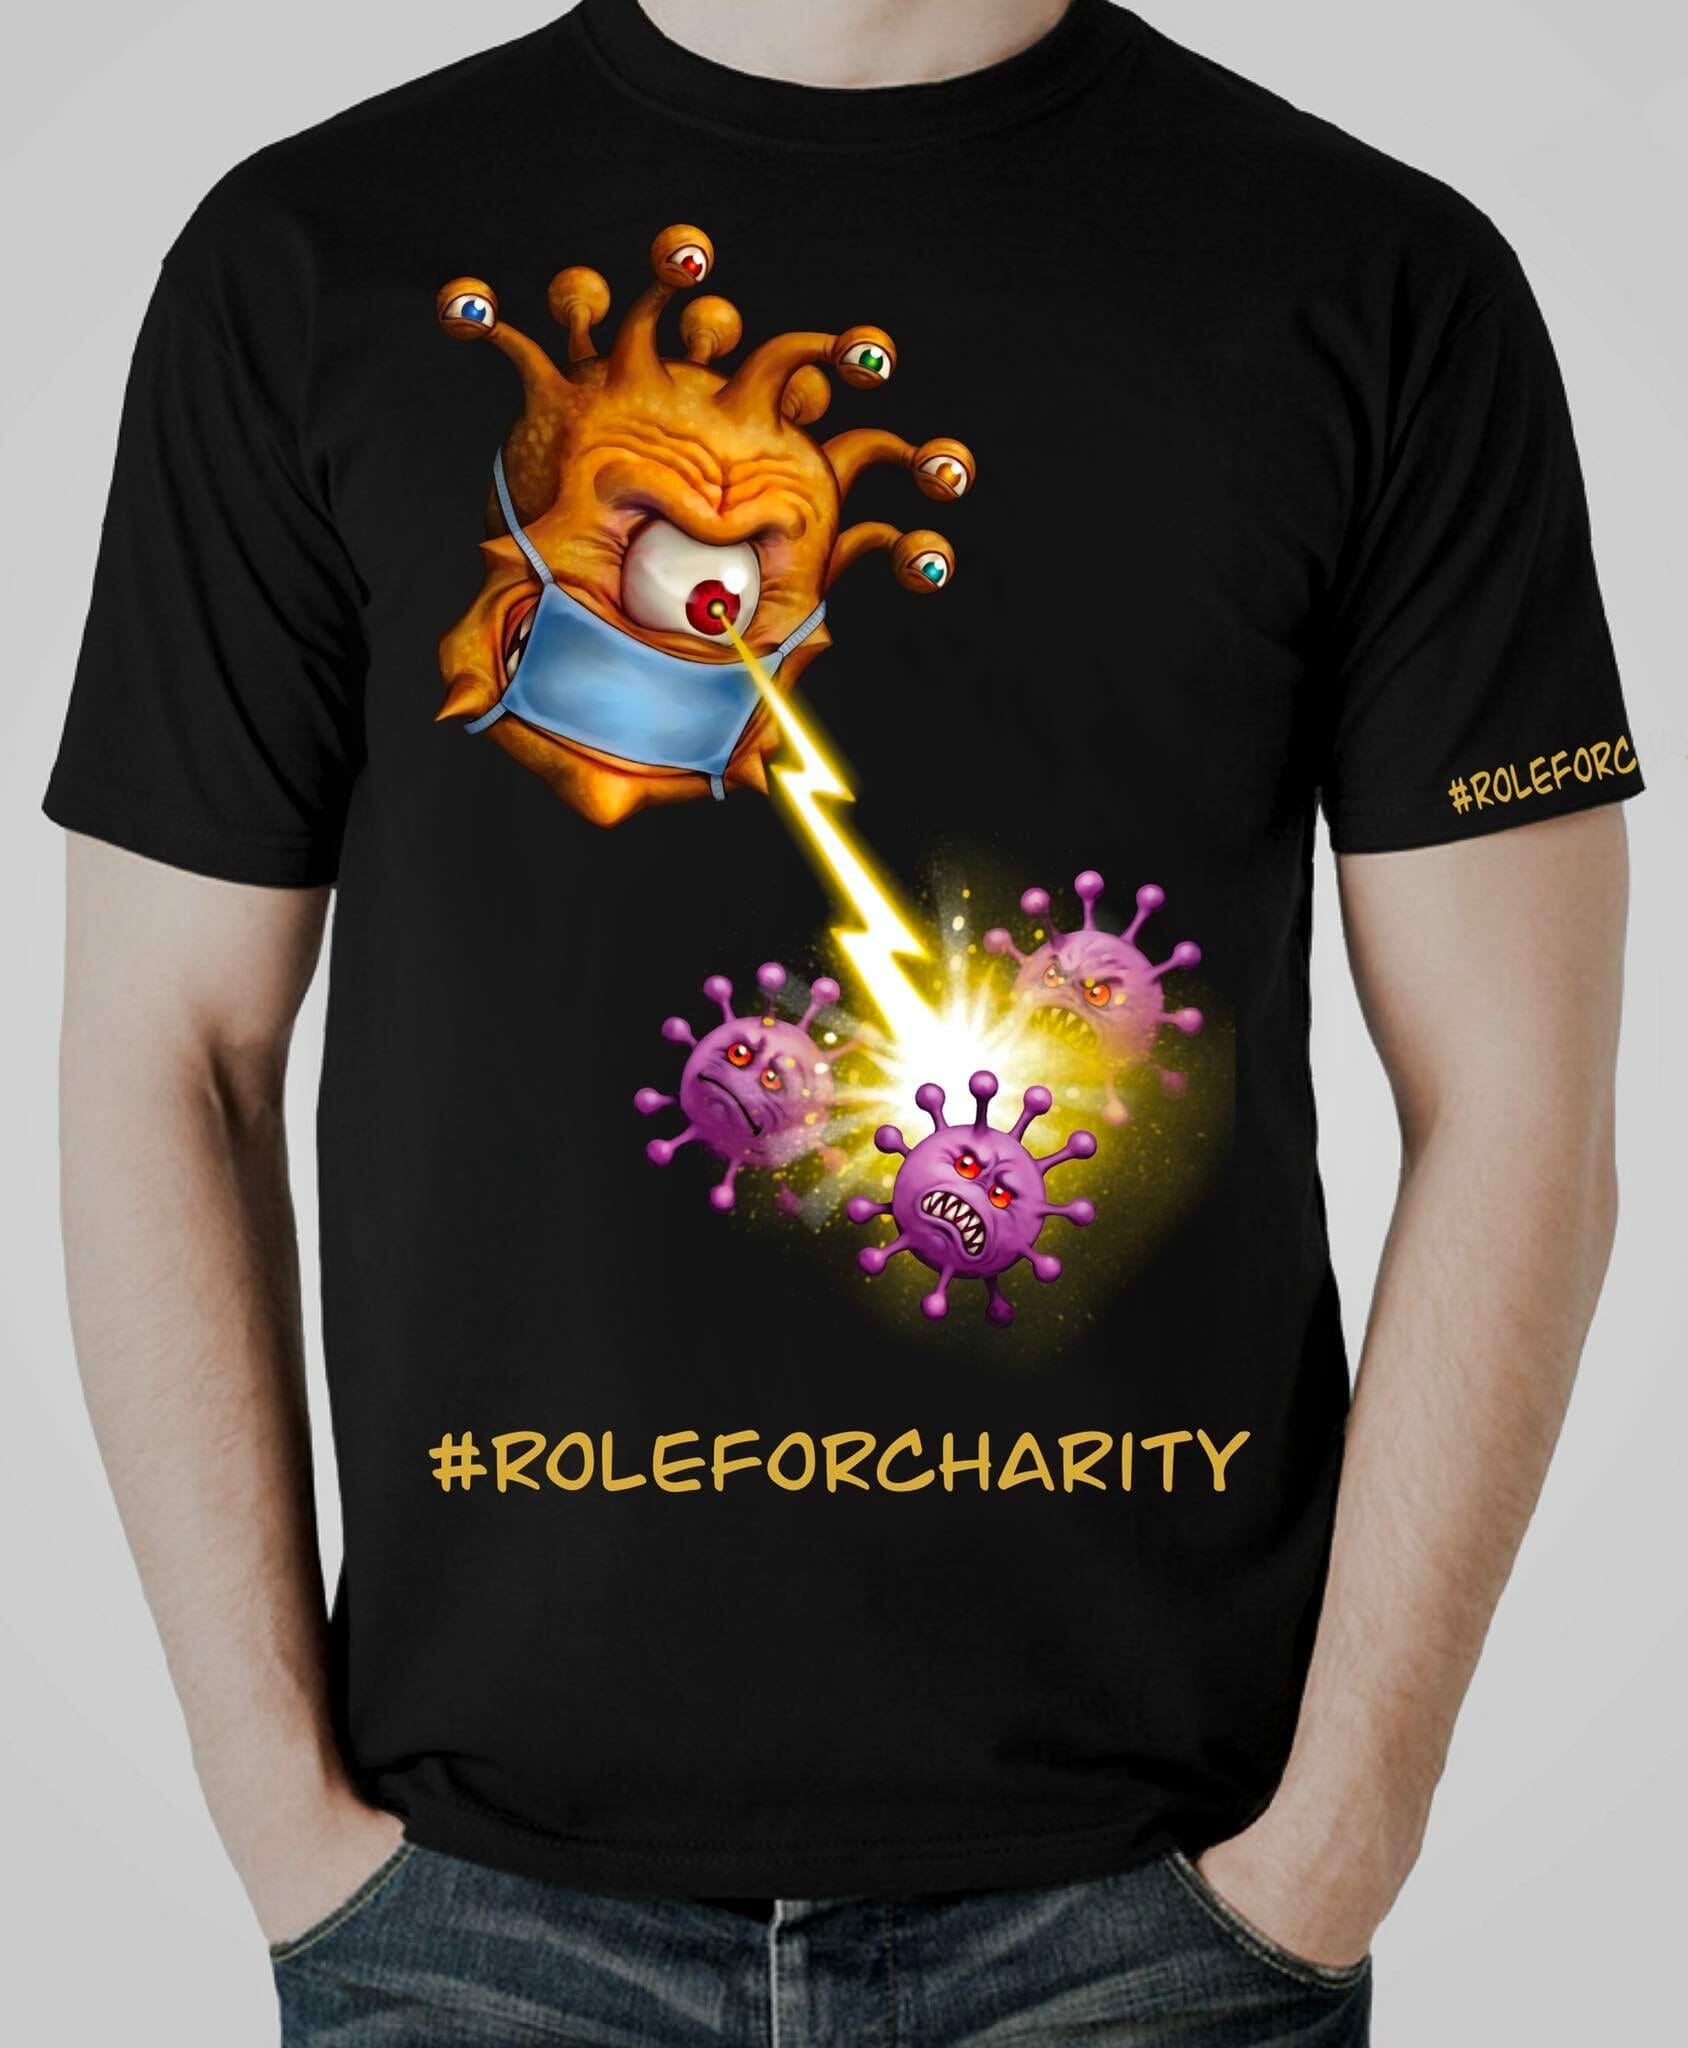 Role Play Haven's charity t-shirt